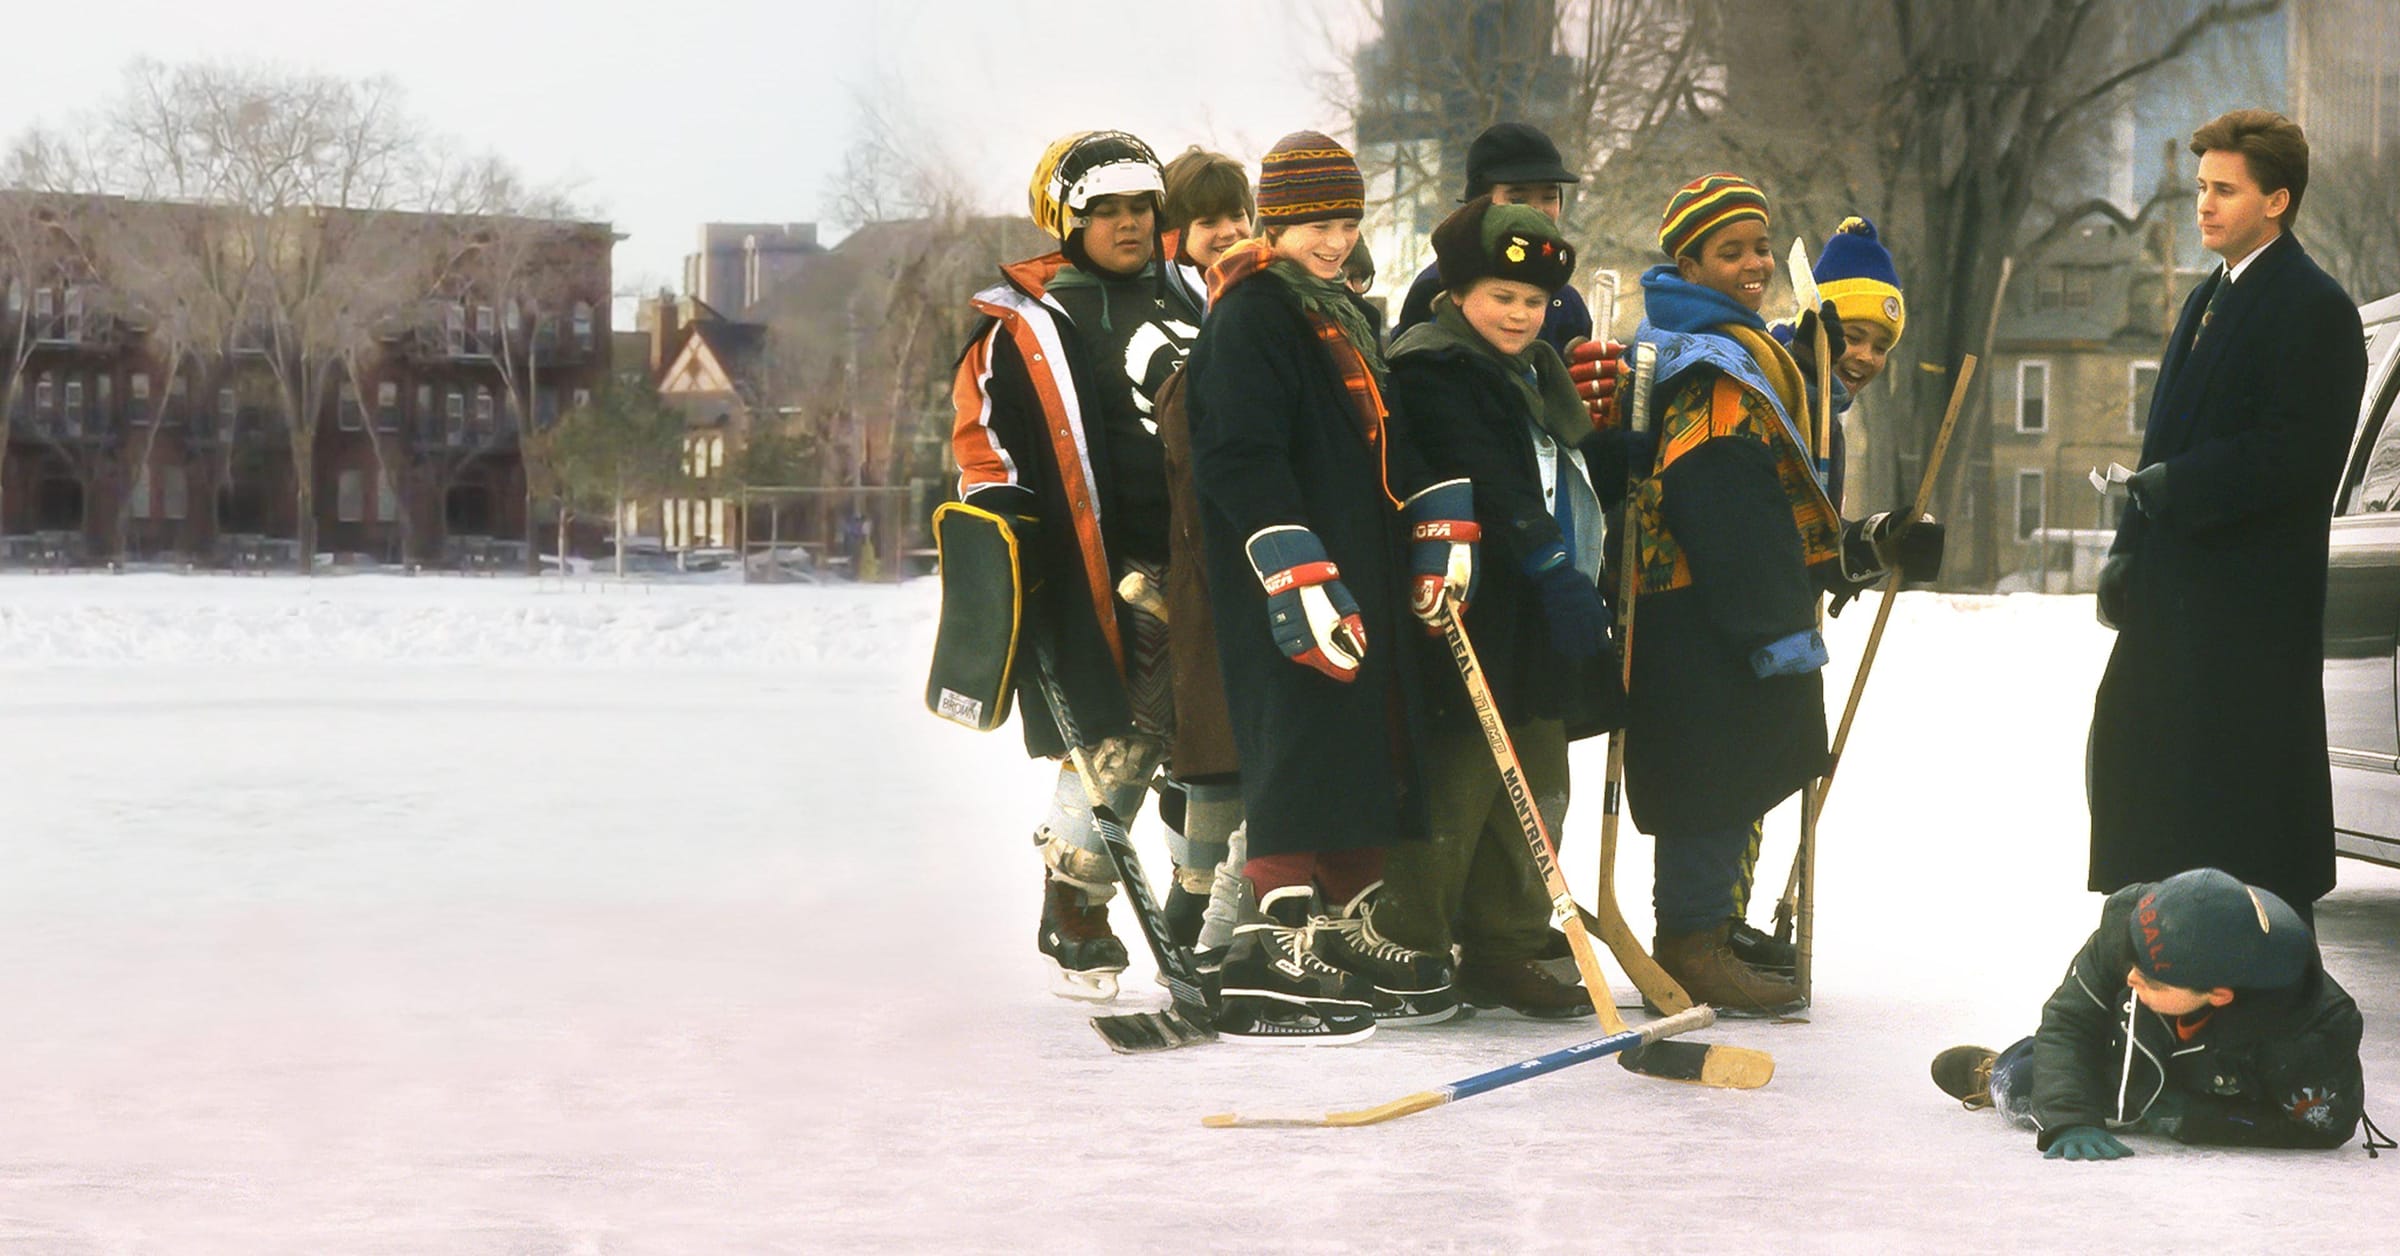 The Definitive Ranking of the Players From the 'Mighty Ducks